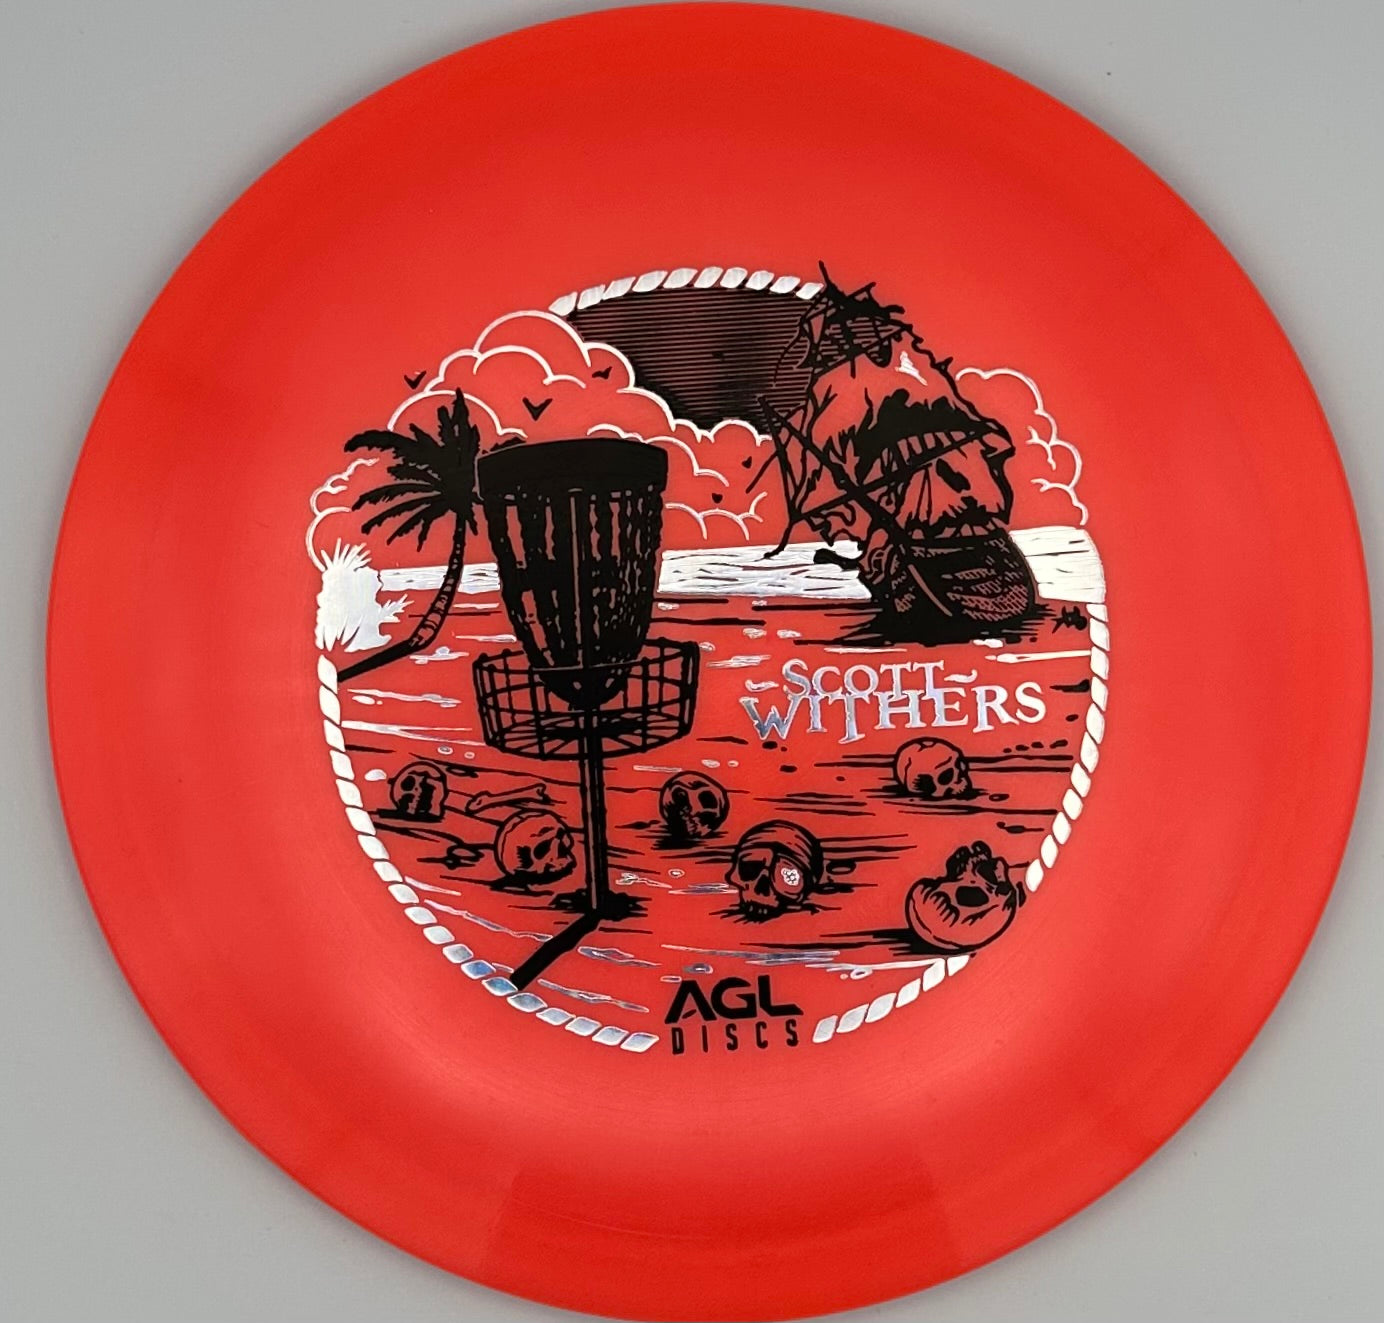 AGL Discs - Red Alpine Sycamore (Scott Withers Tour Stamp)